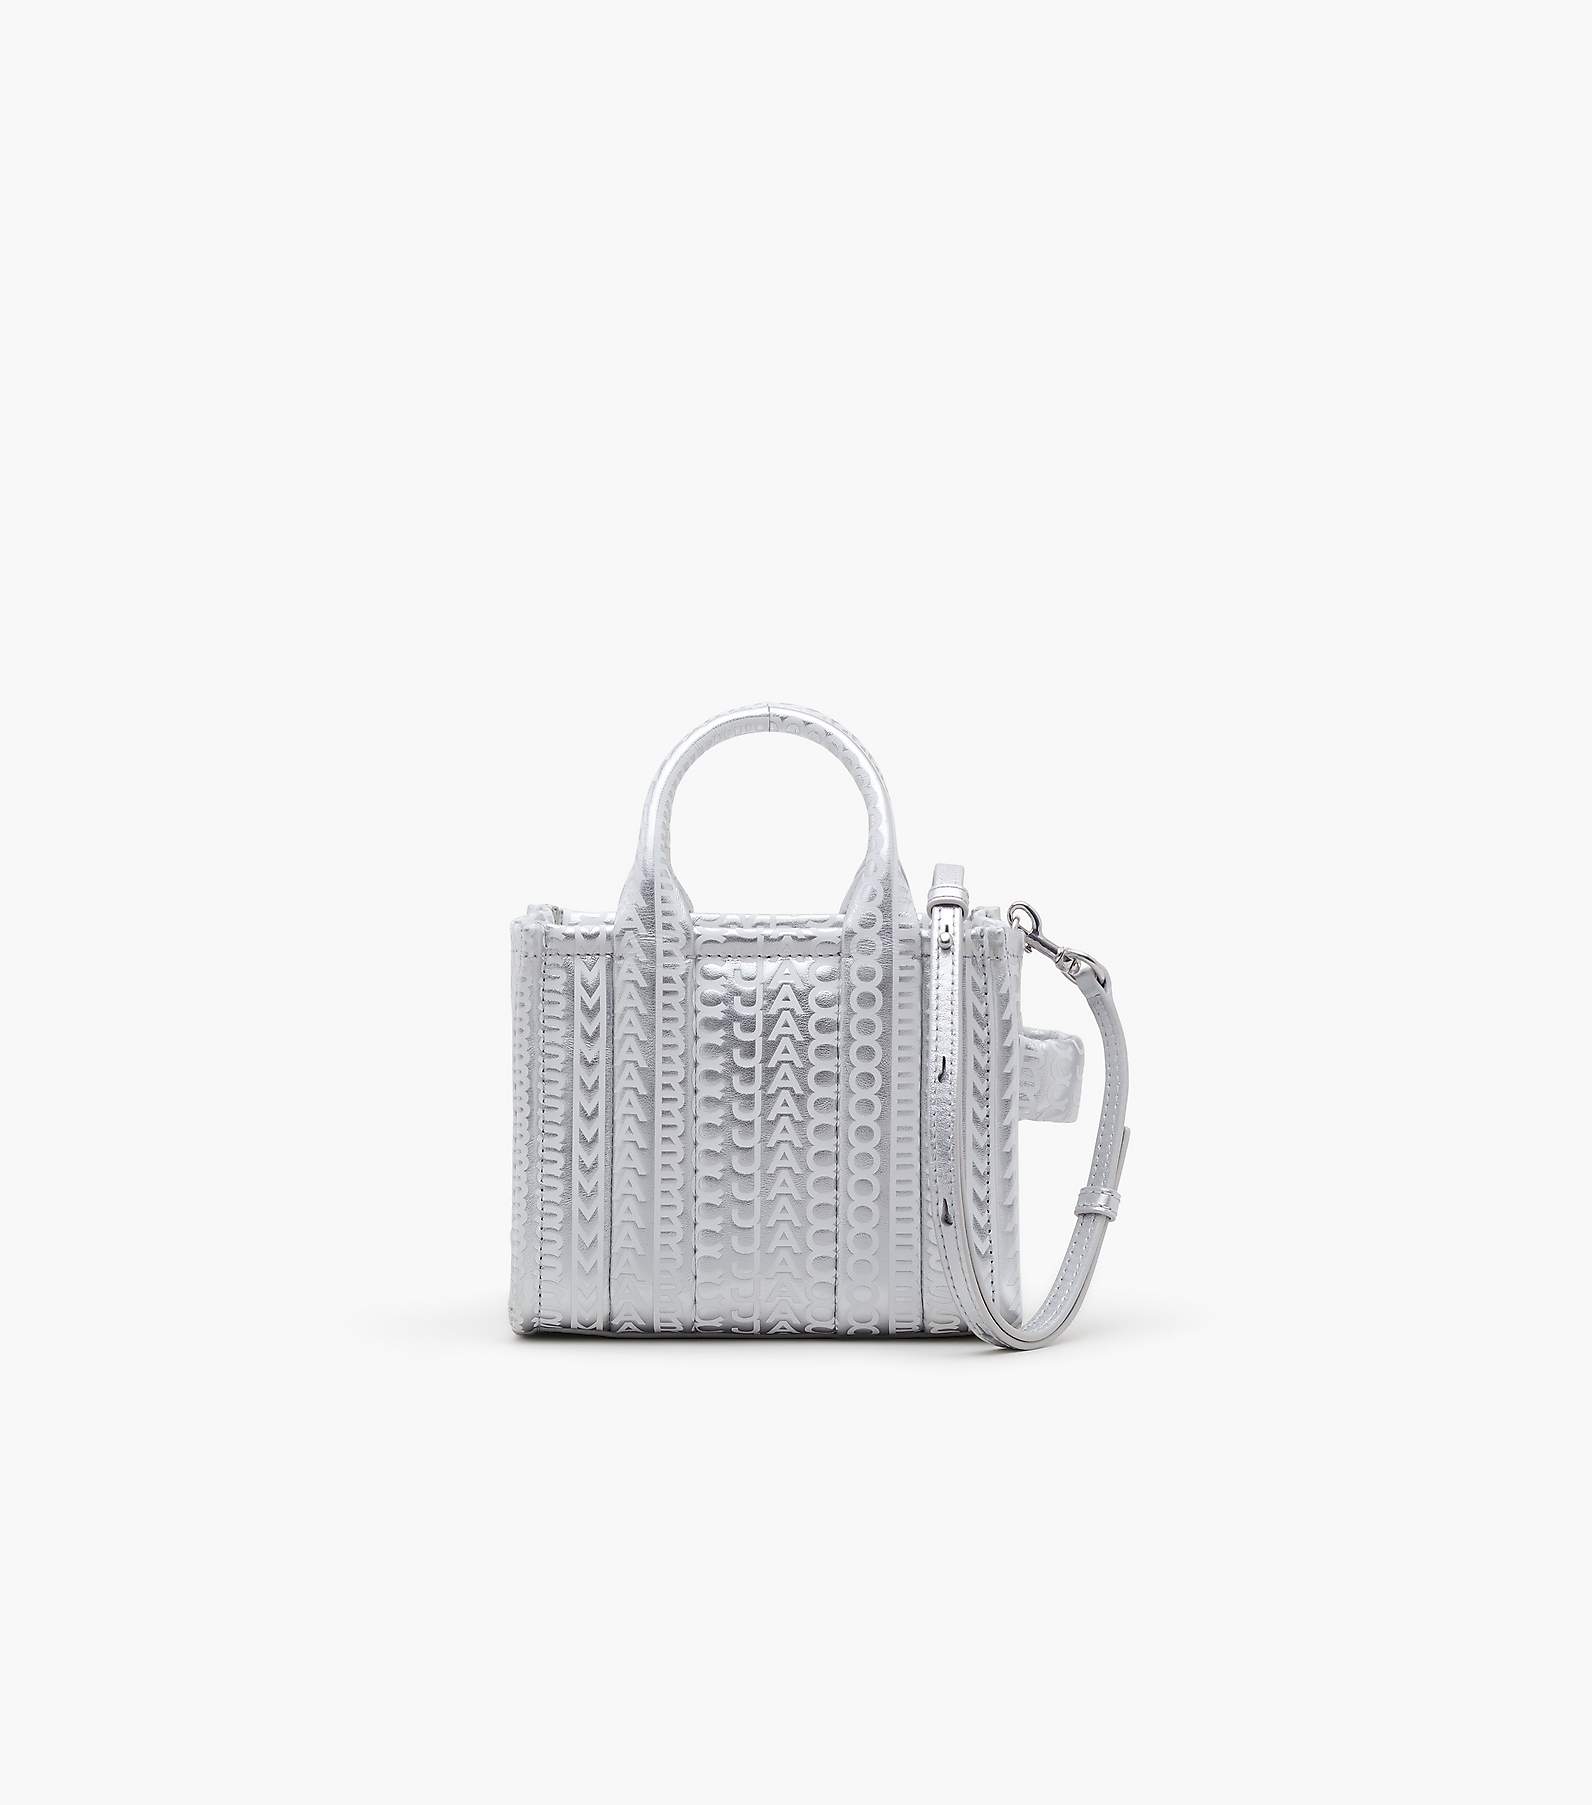 The Medium Leather Tote Bag in White - Marc Jacobs